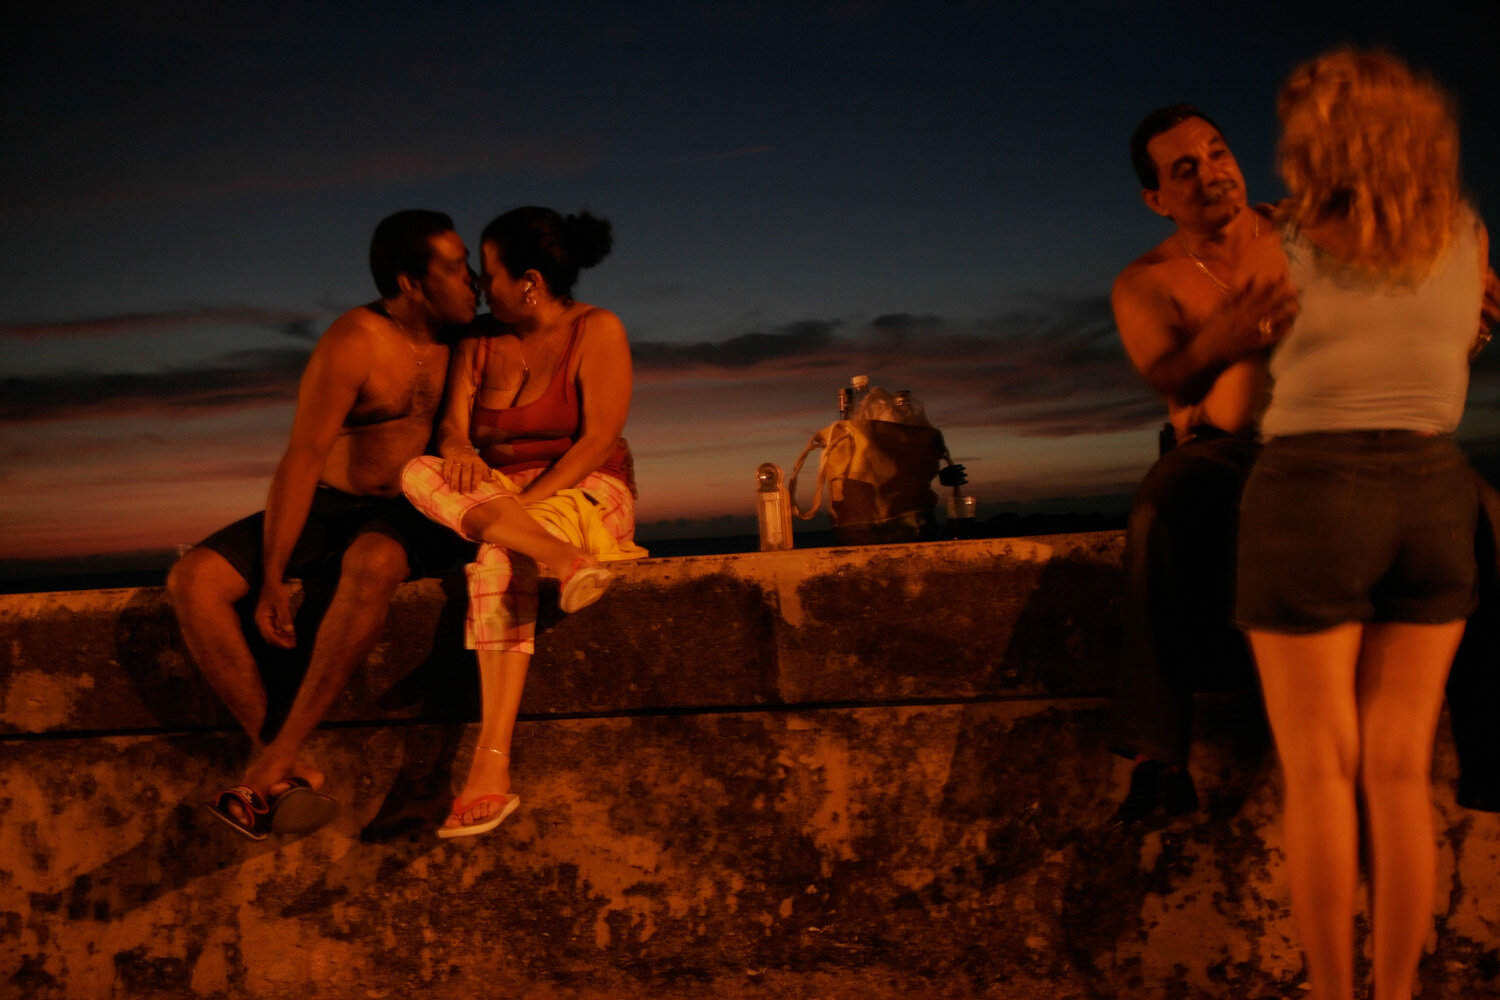  Cuban couples hug and kiss each other after sunset on the wall of Havana's waterfront boulevard Malecon. 